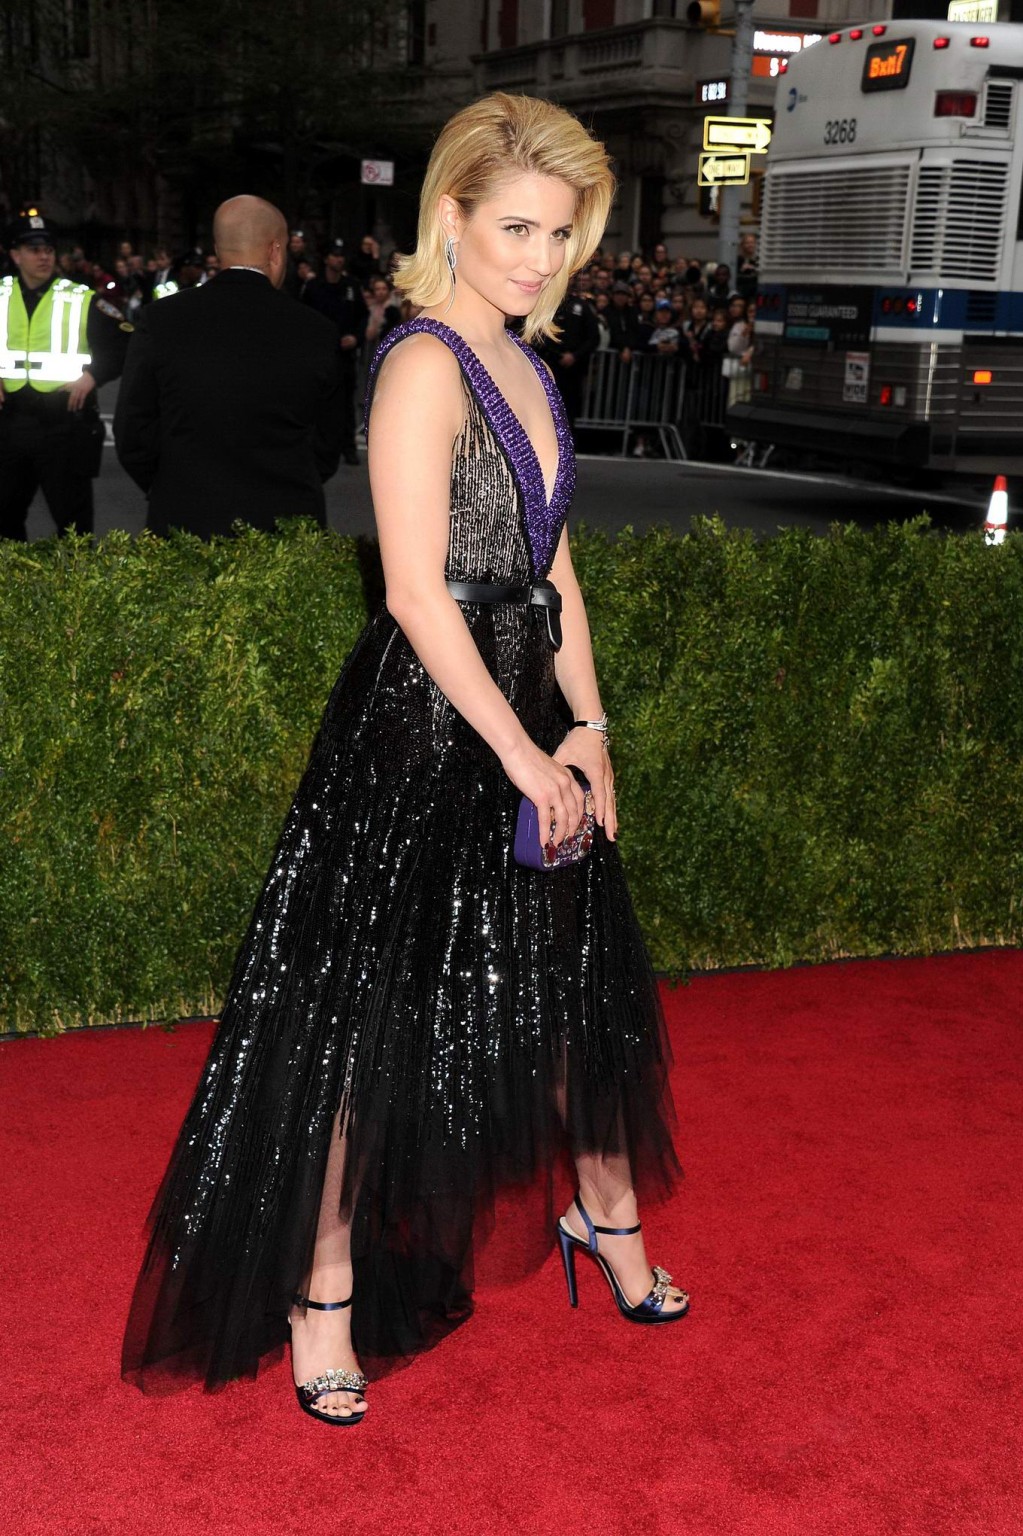 Dianna Aragon showing cleavage at the 2014 Met Gala in NYC #75196837